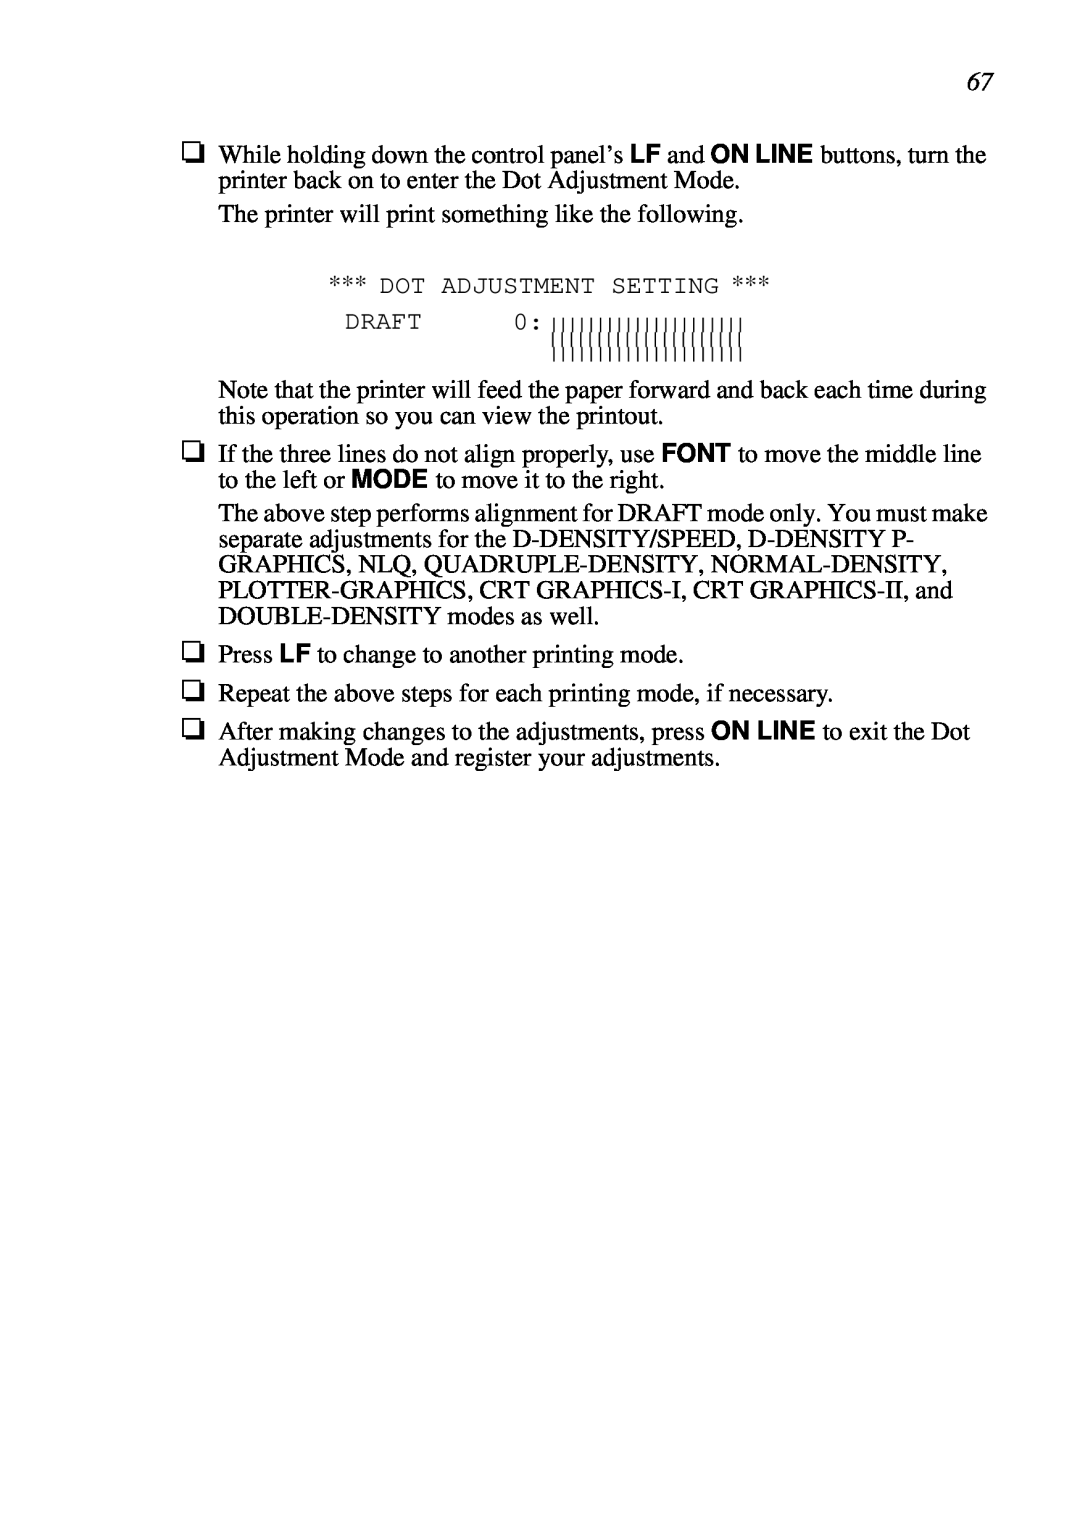 Star Micronics LC-7211 user manual The printer will print something like the following 